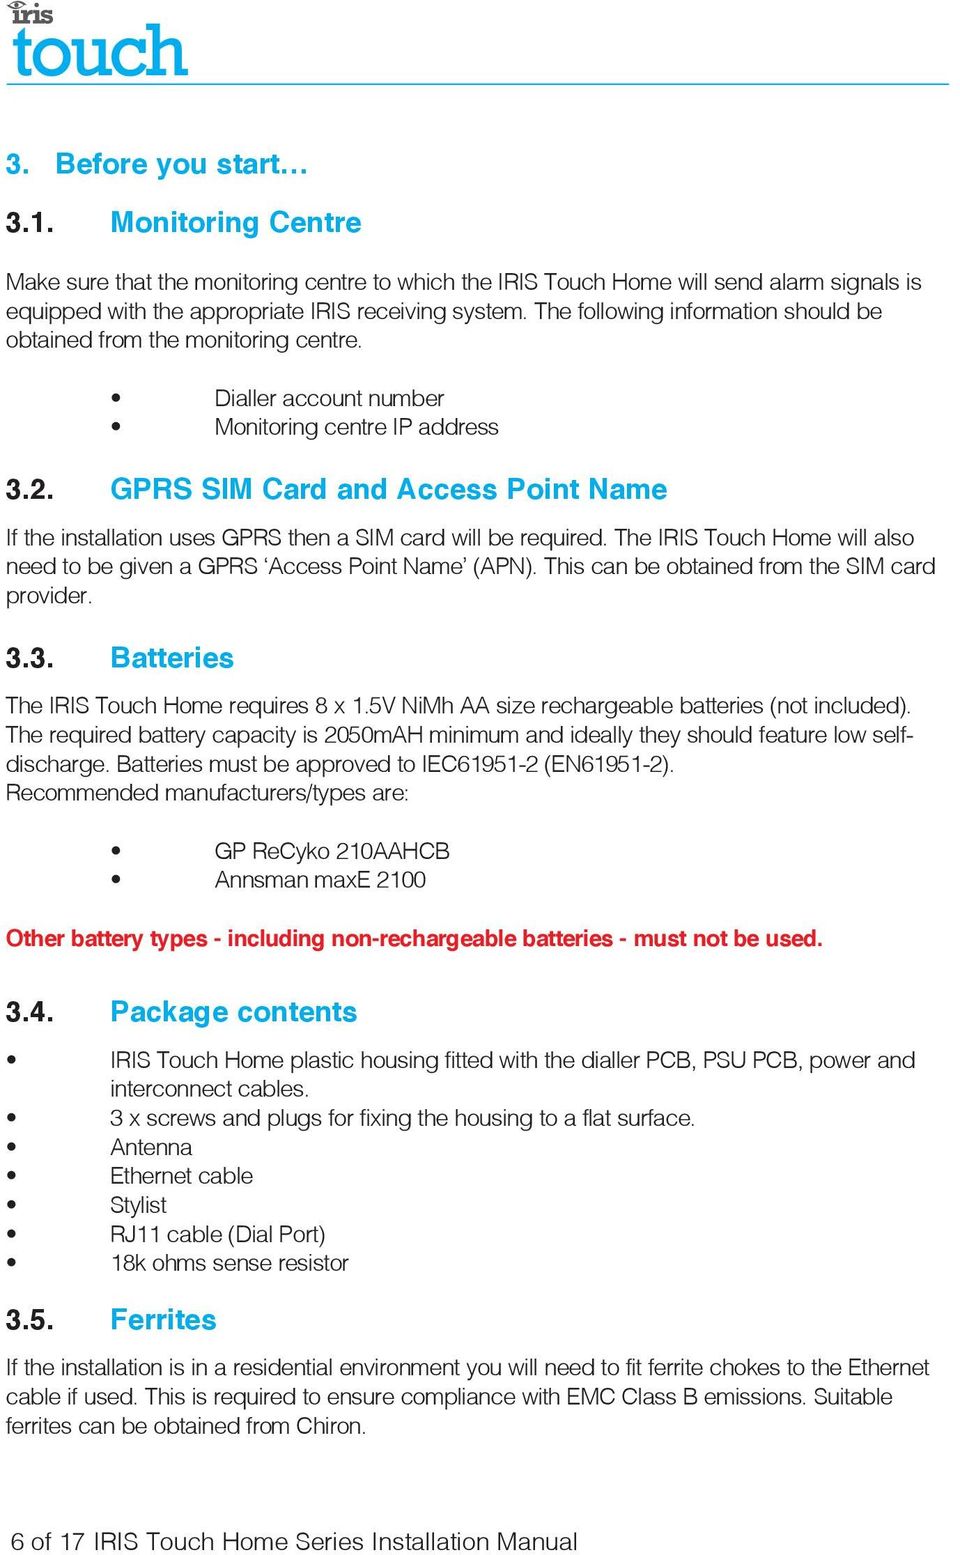 GPRS SIM Card and Access Point Name If the installation uses GPRS then a SIM card will be required. The IRIS Touch Home will also need to be given a GPRS Access Point Name (APN).